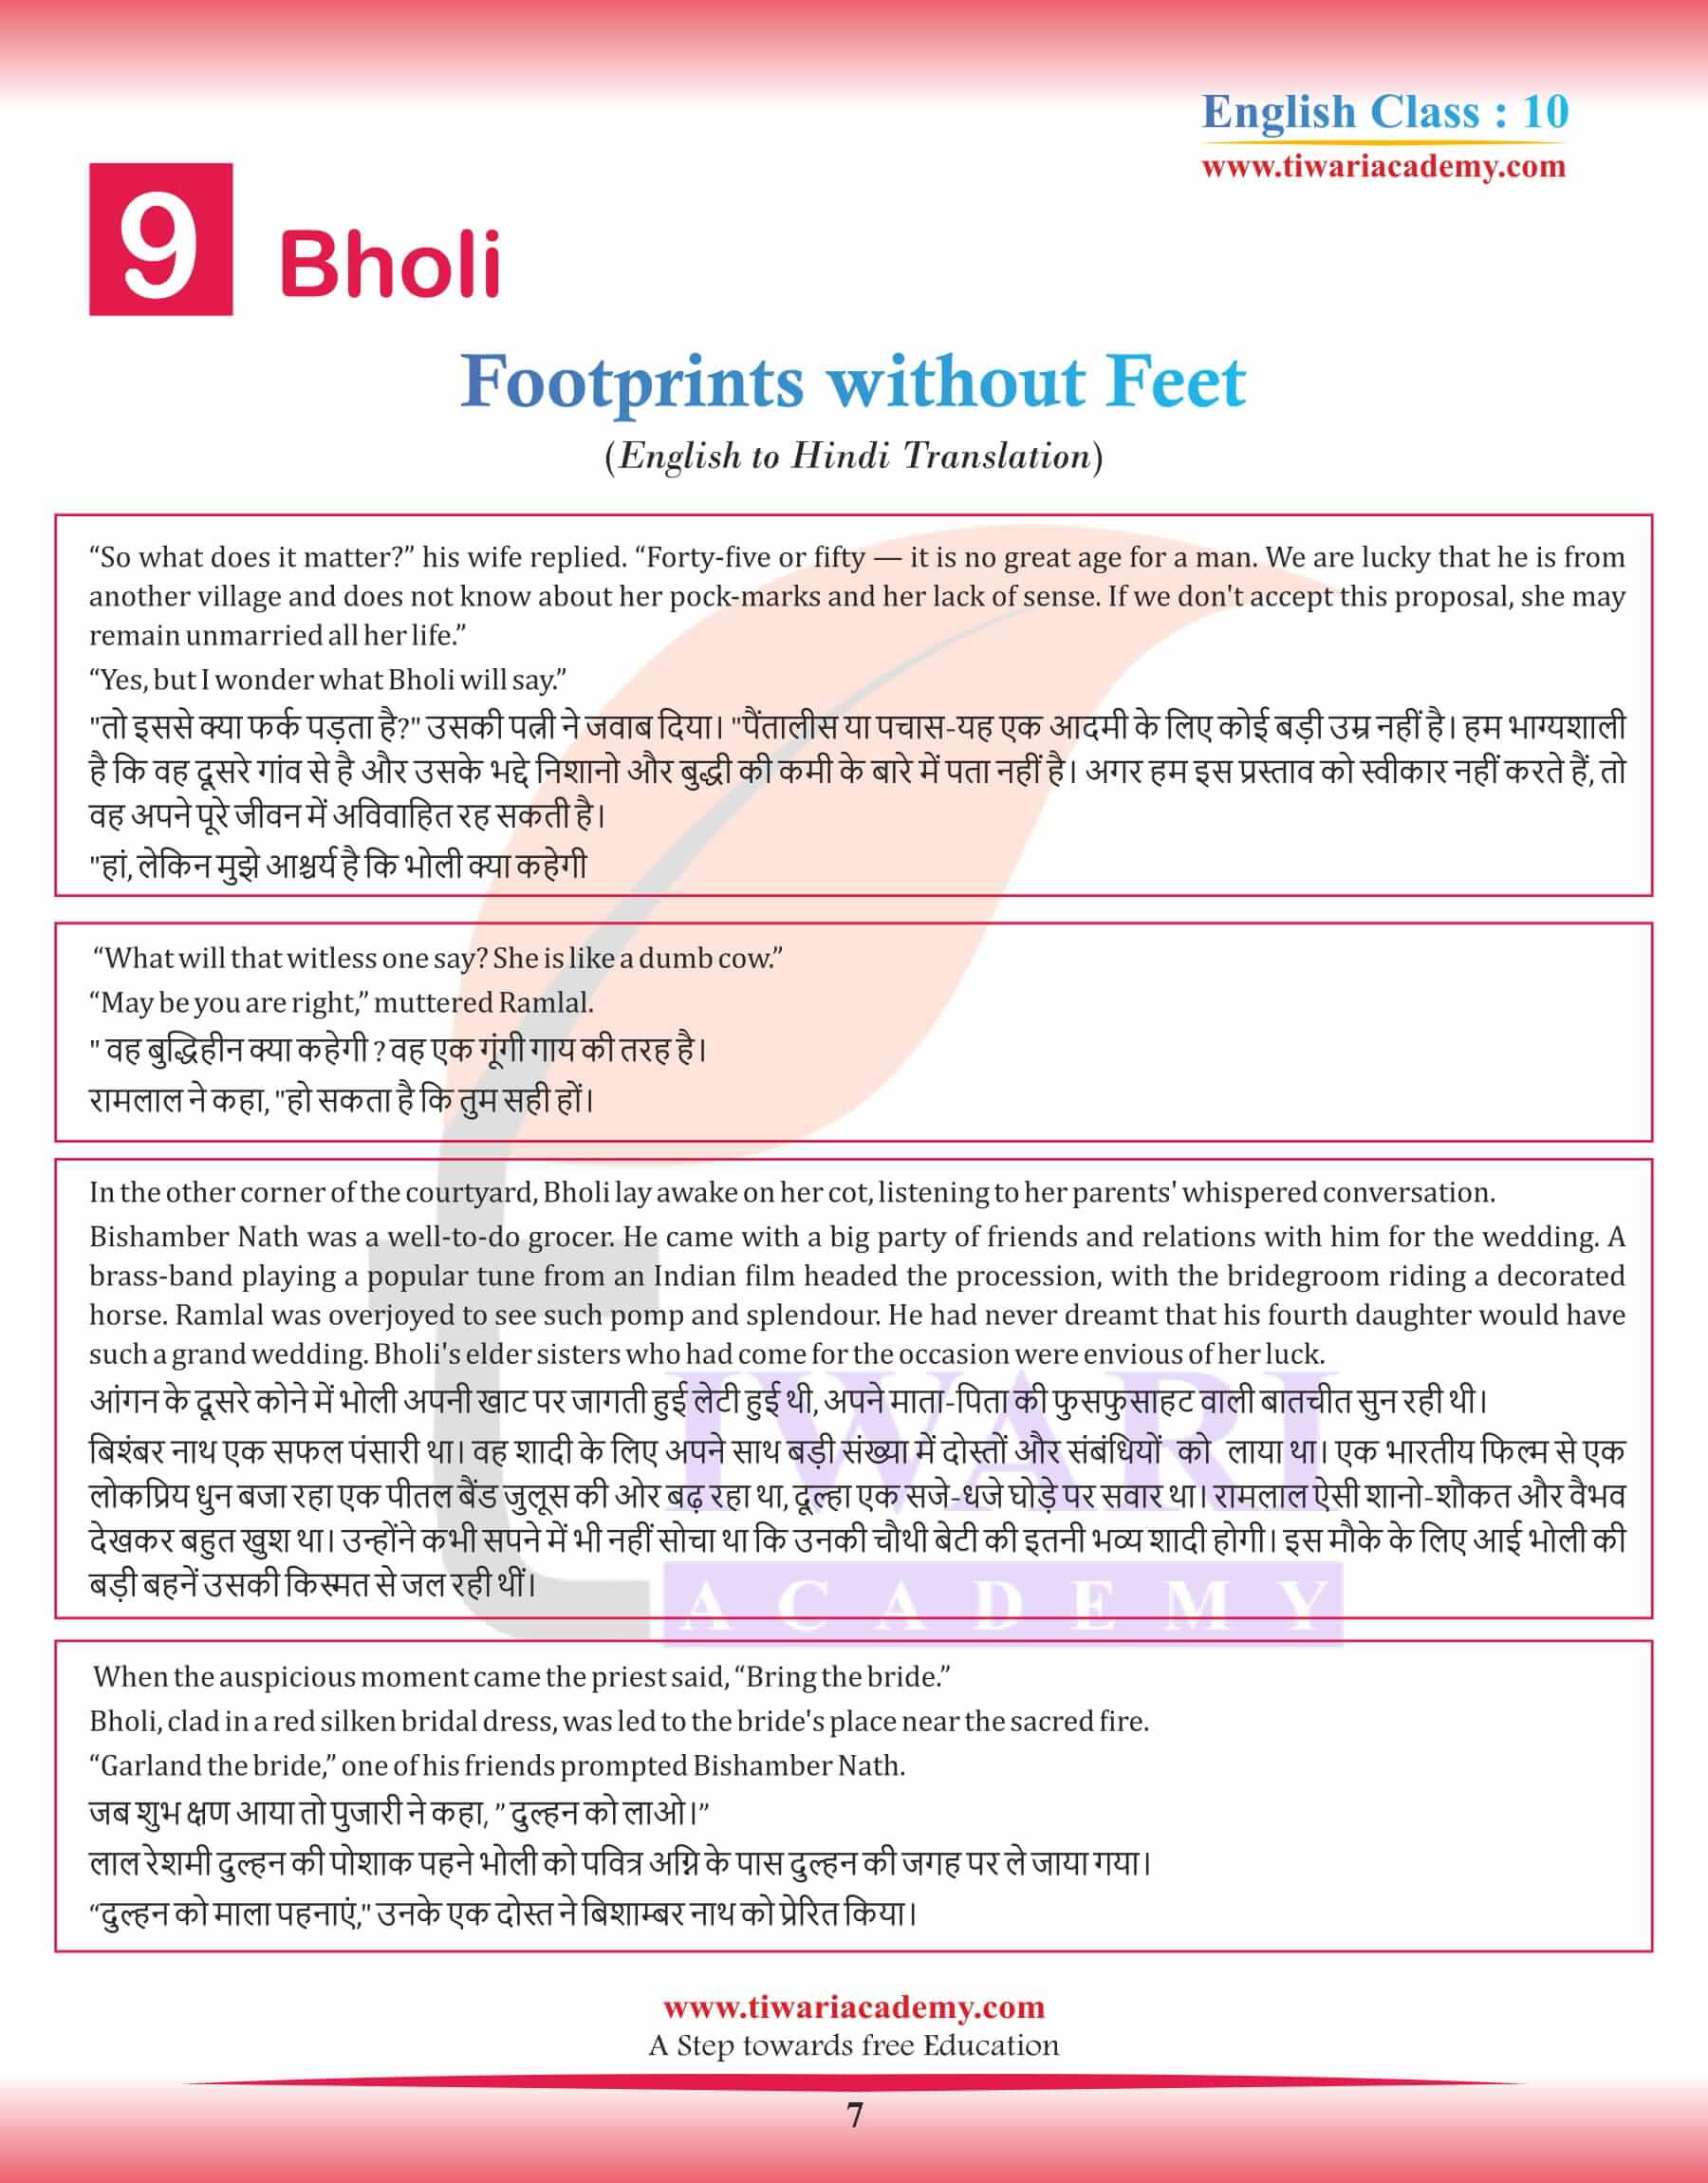 Class 10 English Supplementary Chapter 9 in Hindi